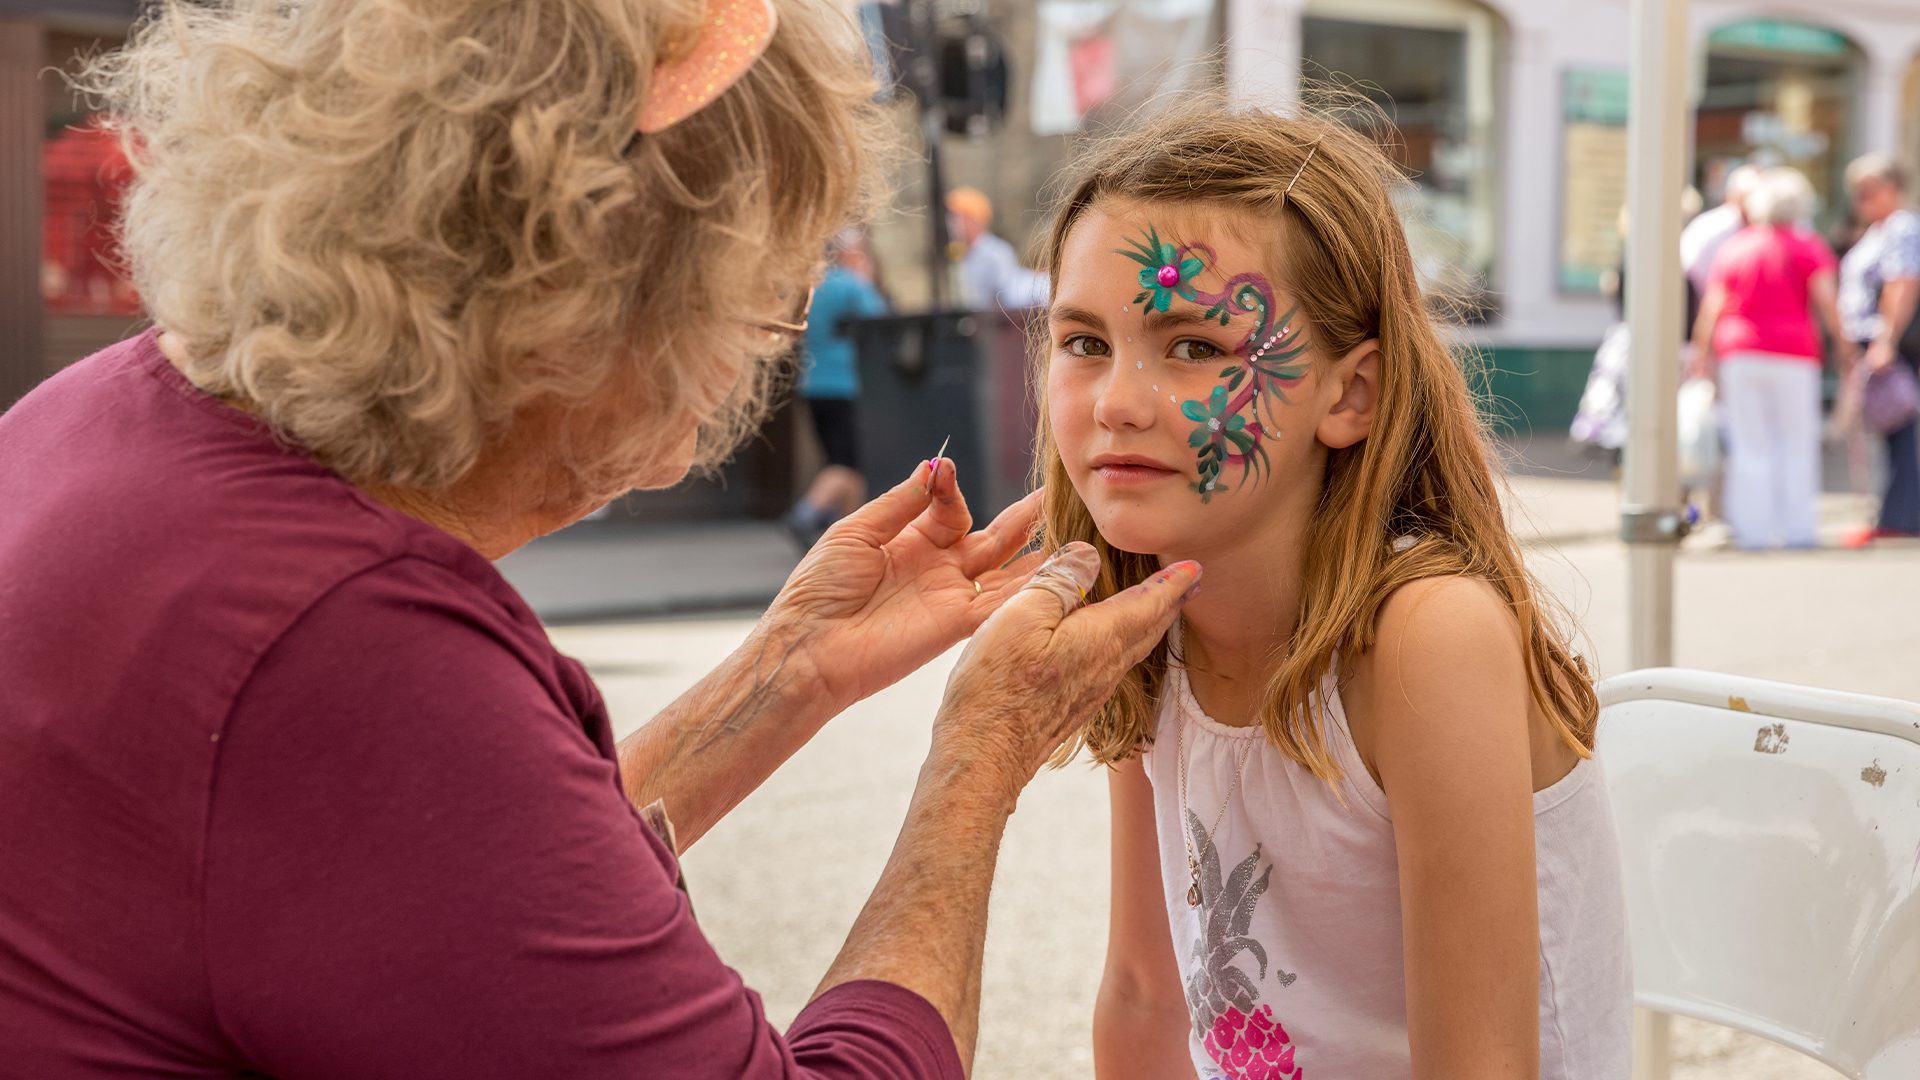 Older lady wearing a pink top facepainting a young girl